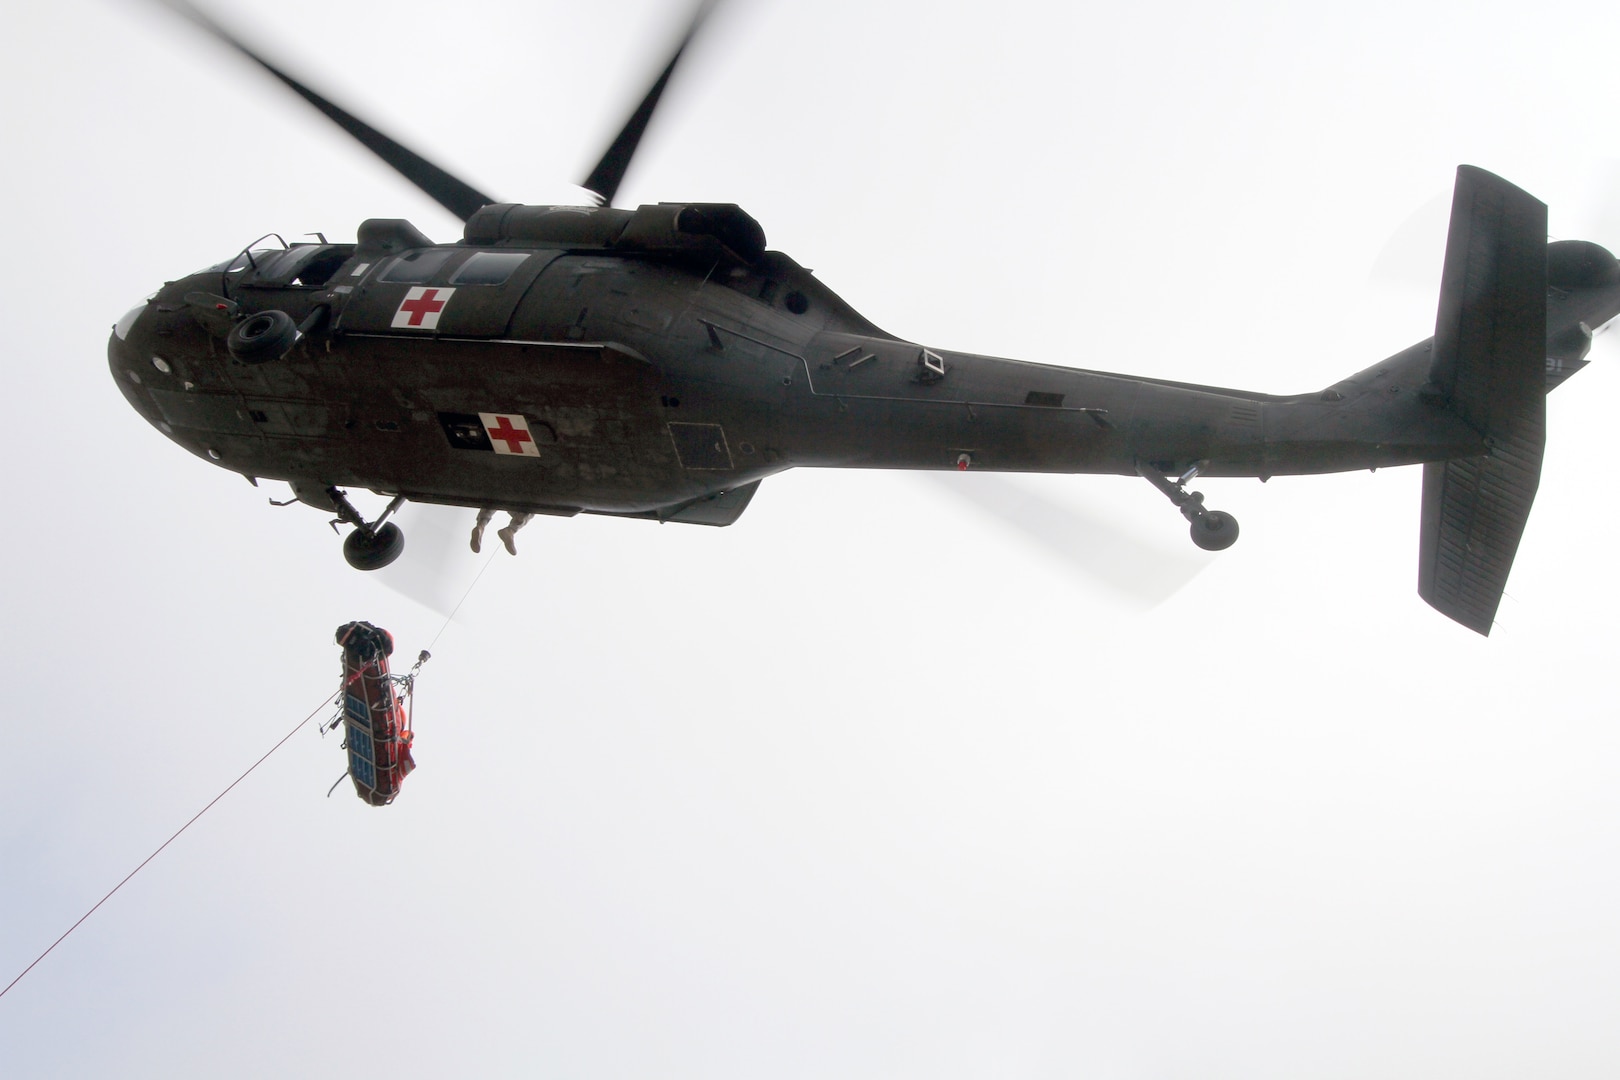 Military rescuers joined civilian crews in saving a fallen climber in Colorado but the effort left one National Guard member with a broken lower leg.